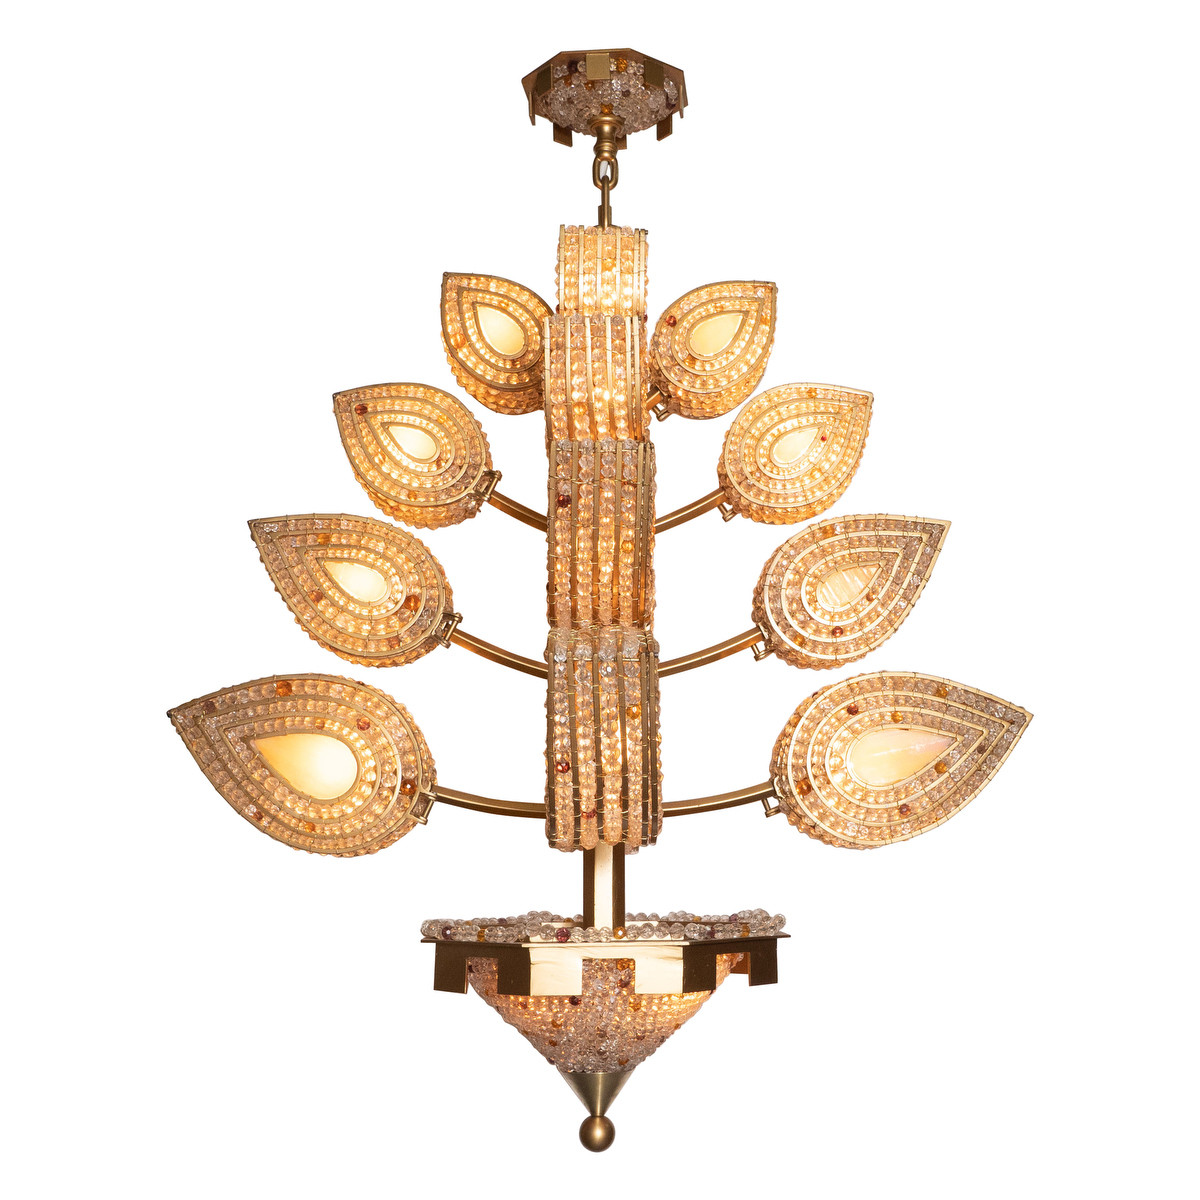 Beaded and stained glass foliate motif chandelier